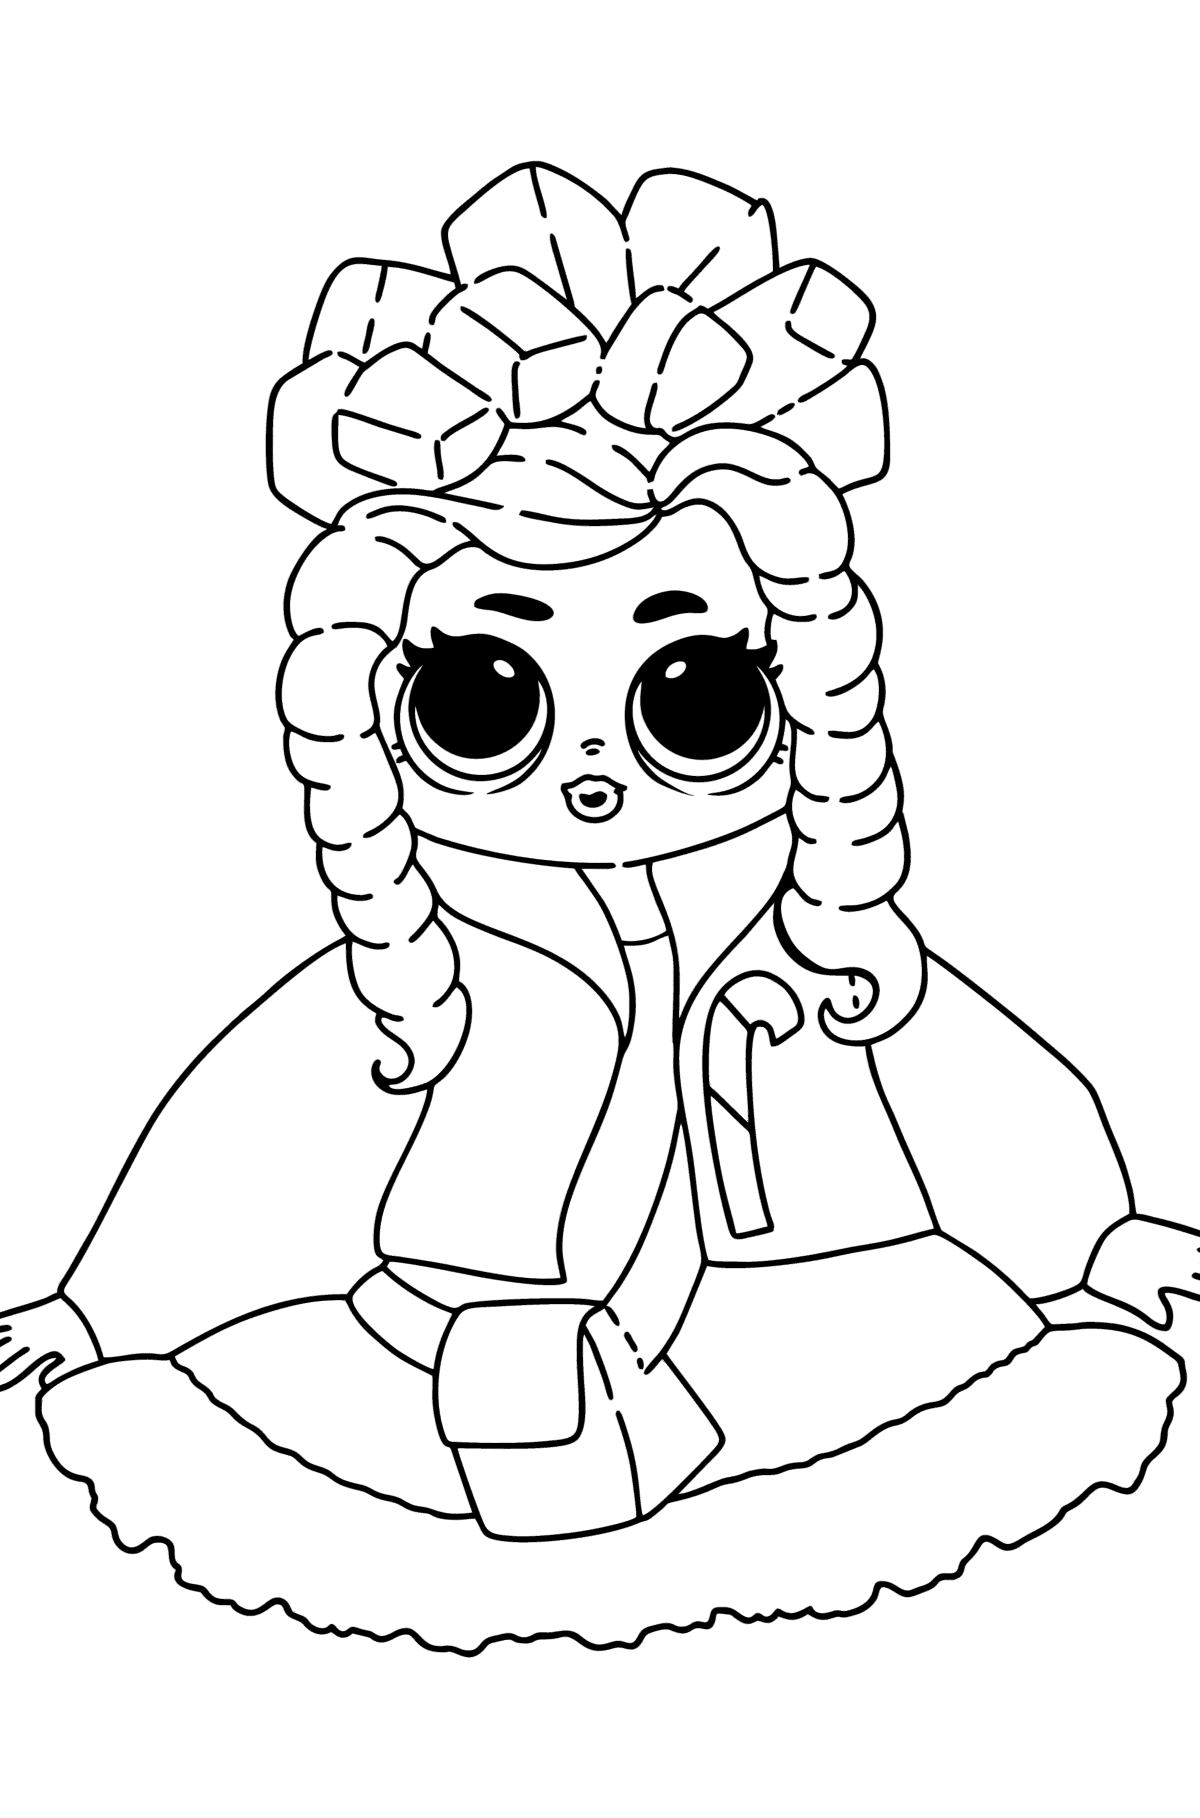 Coloring pages LOL OMG Dolls   Download, Print, and Color Online